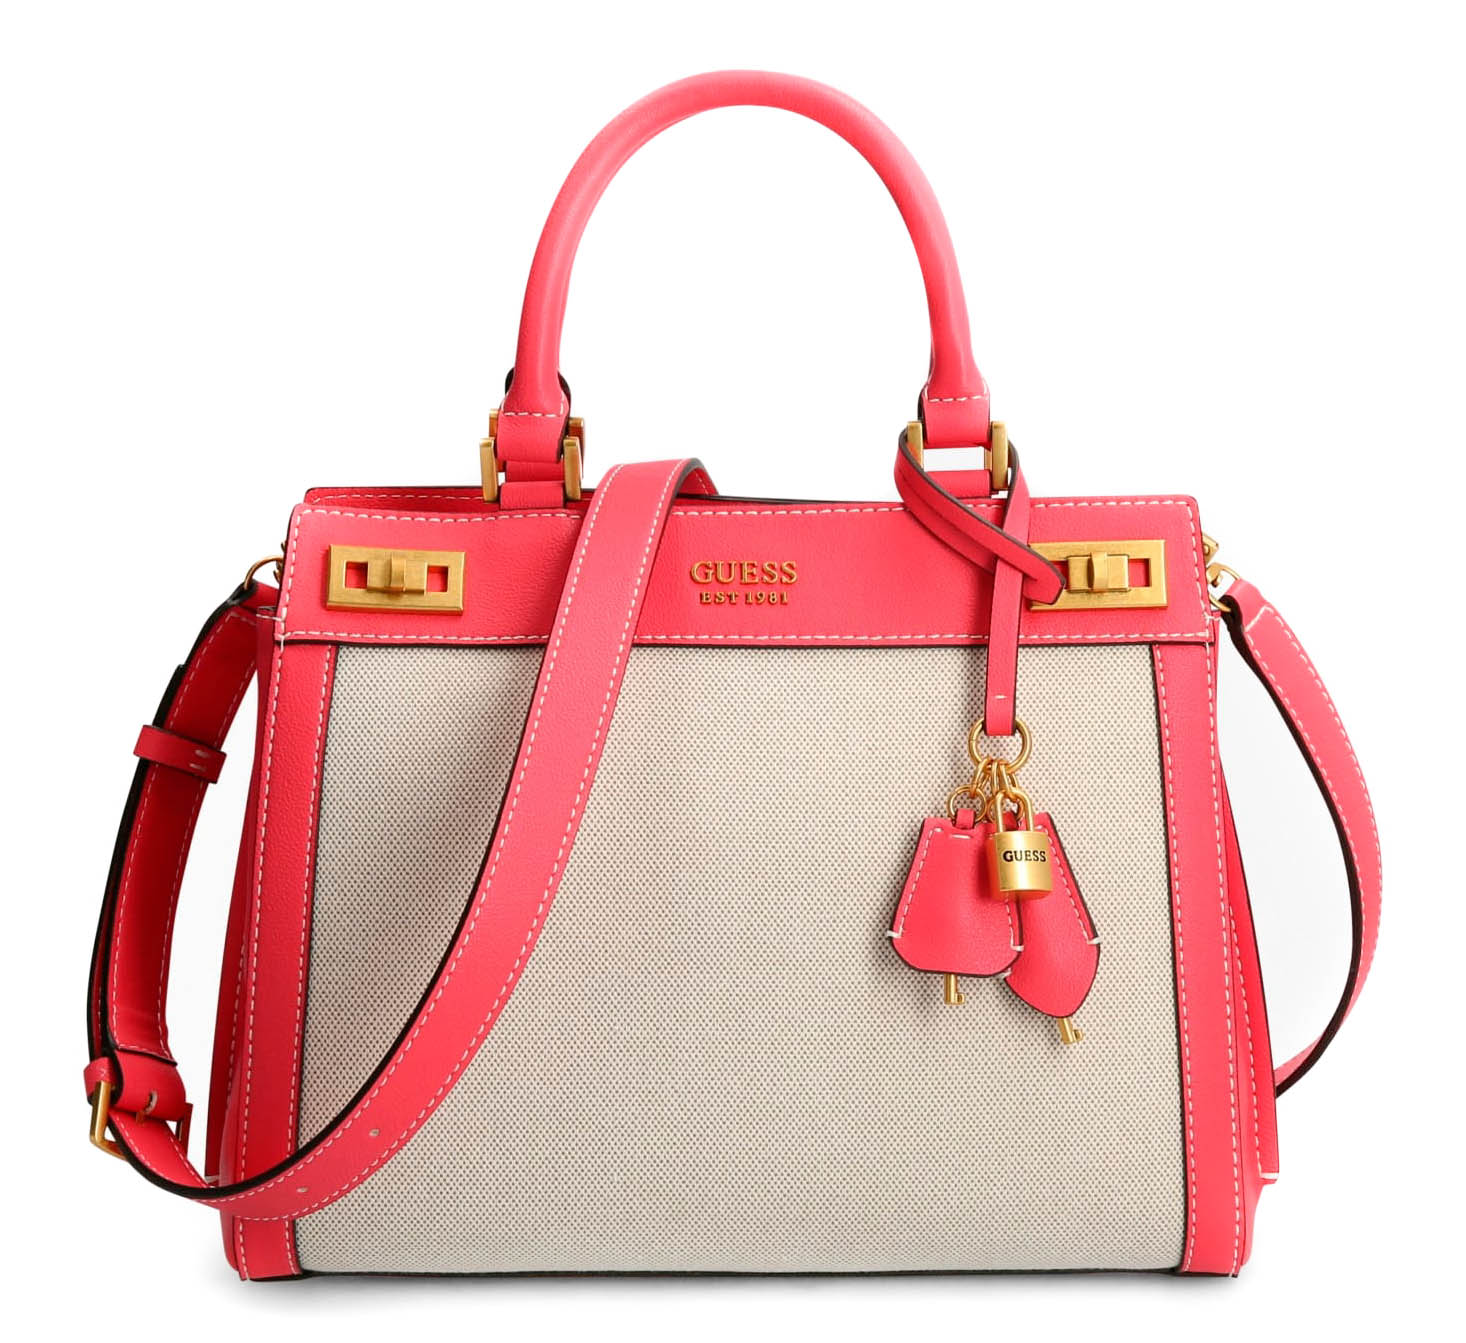 GUESS cross body bag Katey Luxury Satchel Natural / Aloe Palm, Buy bags,  purses & accessories online